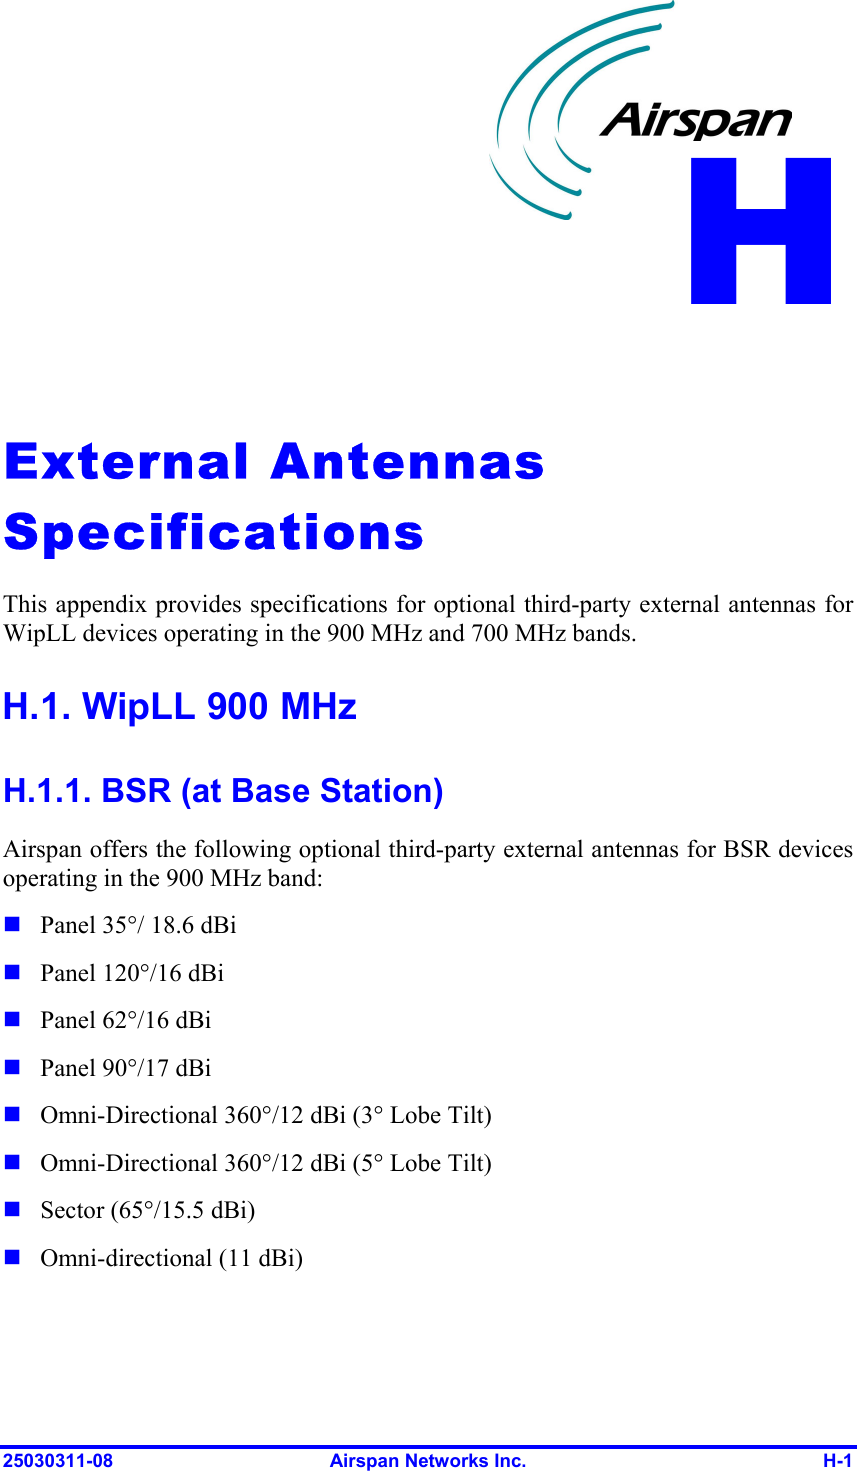  25030311-08  Airspan Networks Inc.  H-1   External Antennas Specifications  This appendix provides specifications for optional third-party external antennas for WipLL devices operating in the 900 MHz and 700 MHz bands. H.1. WipLL 900 MHz H.1.1. BSR (at Base Station) Airspan offers the following optional third-party external antennas for BSR devices operating in the 900 MHz band:  Panel 35°/ 18.6 dBi  Panel 120°/16 dBi  Panel 62°/16 dBi  Panel 90°/17 dBi  Omni-Directional 360°/12 dBi (3° Lobe Tilt)  Omni-Directional 360°/12 dBi (5° Lobe Tilt)  Sector (65°/15.5 dBi)  Omni-directional (11 dBi) H